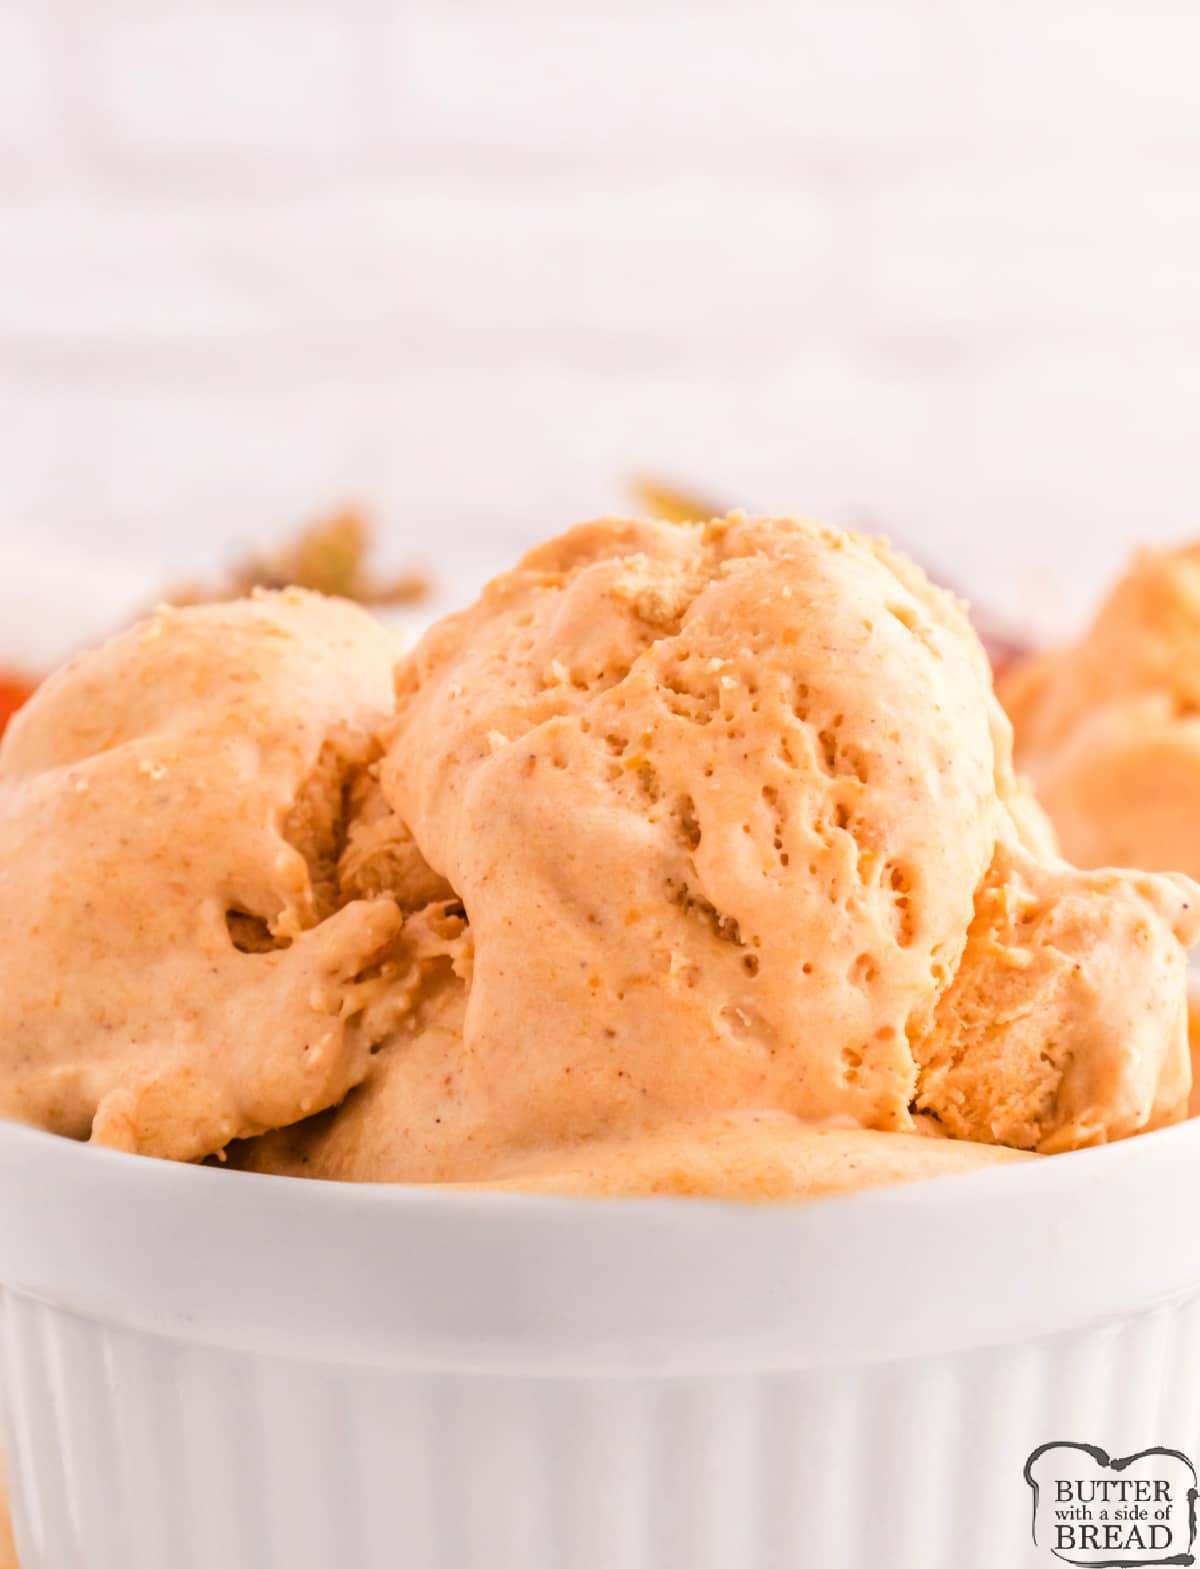 No Churn Pumpkin Ice Cream is made with canned pumpkin puree, maple syrup, pumpkin pie spice, and vanilla extract. Perfect ice cream recipe for fall - no ice cream maker needed!